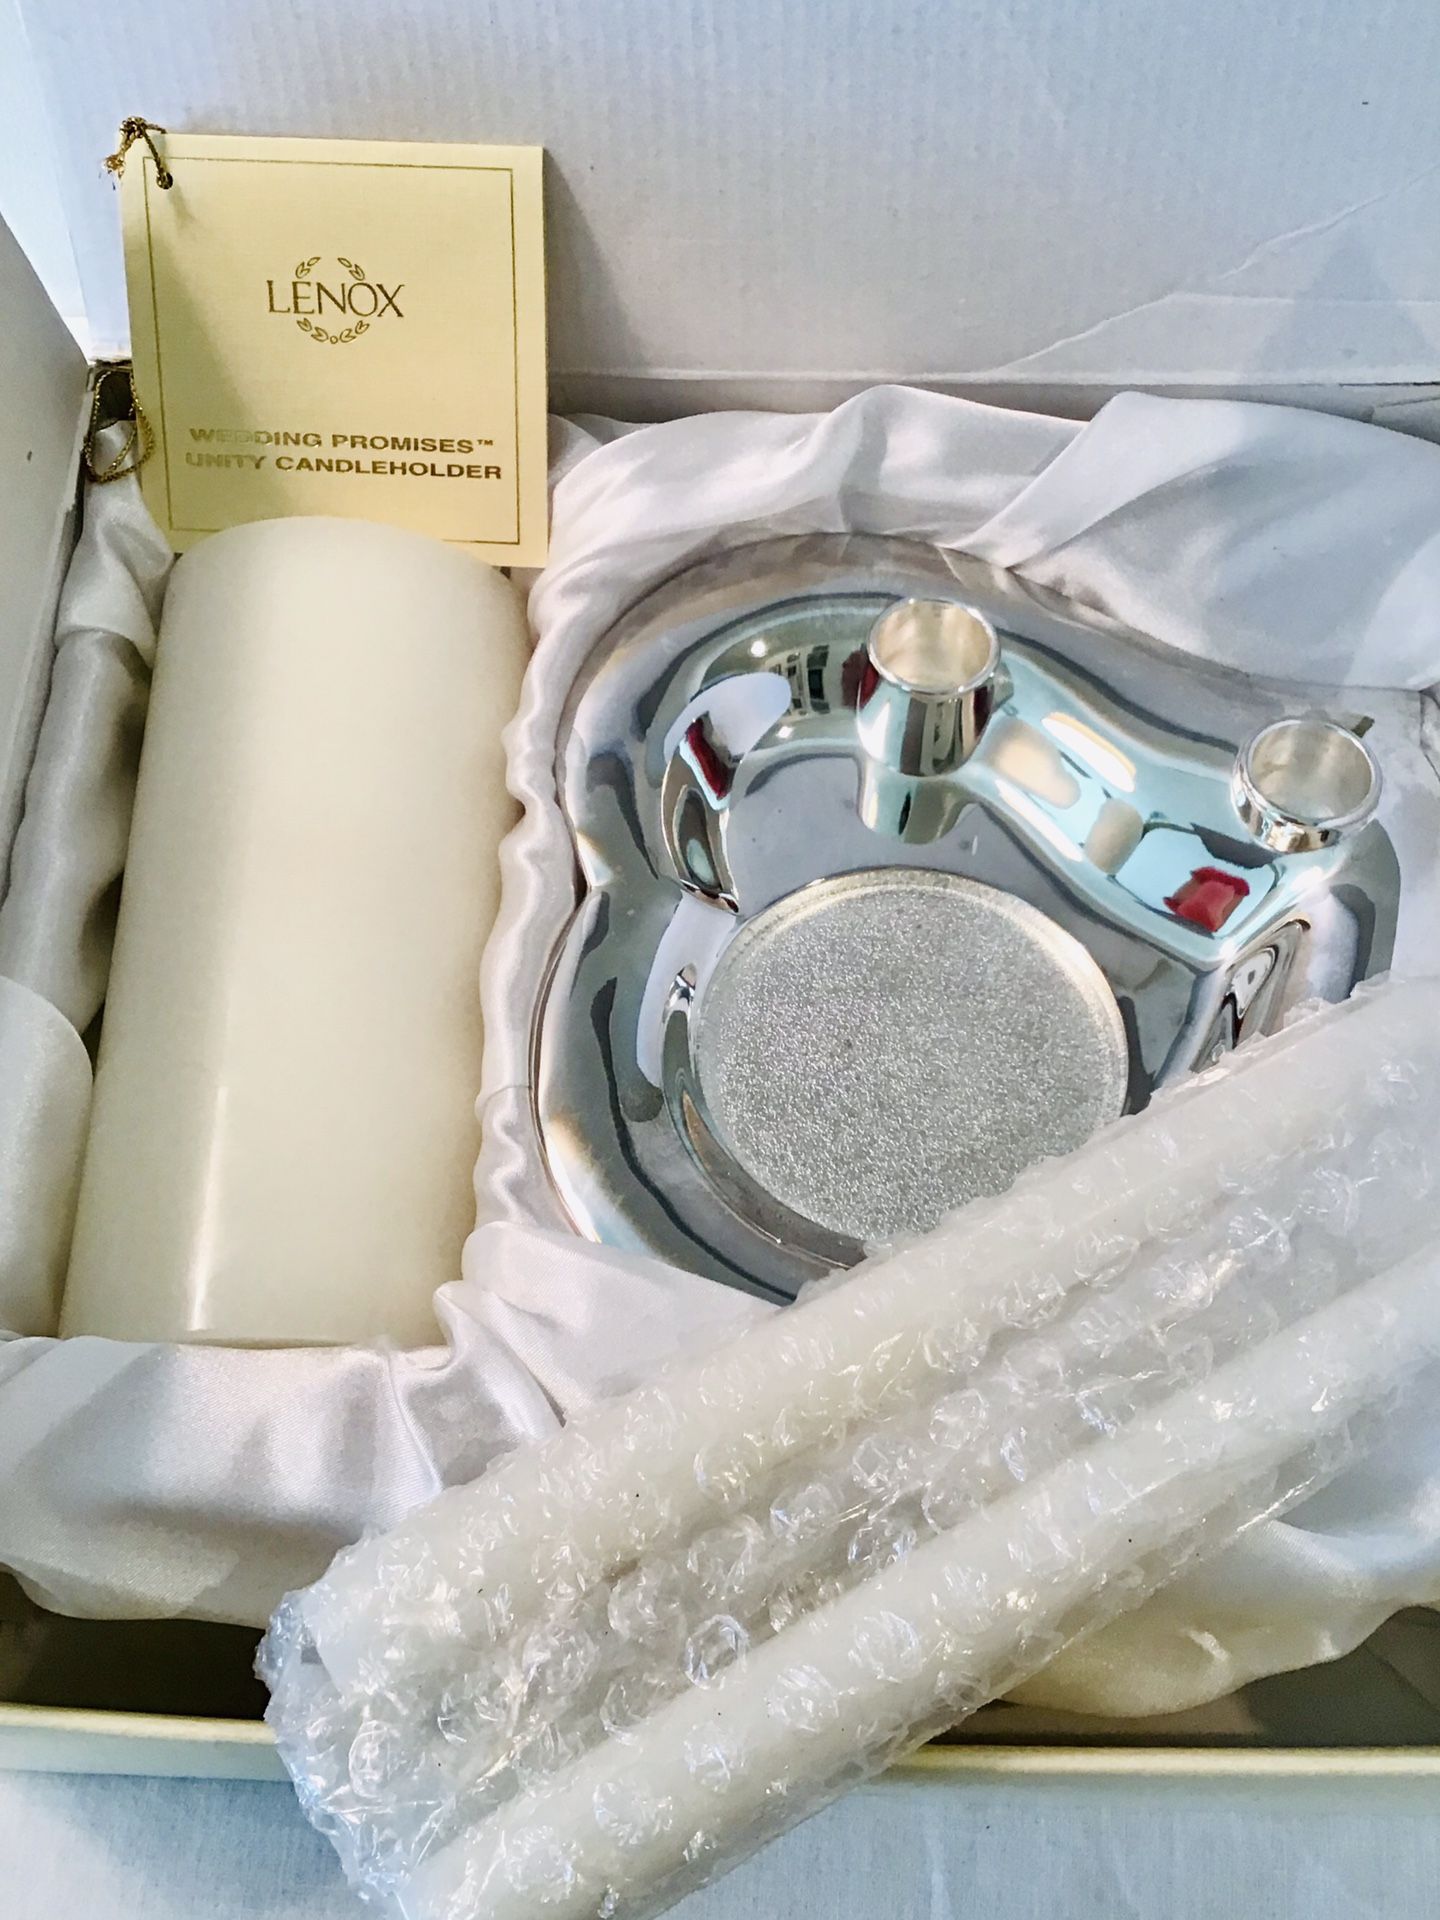 Lenox Wedding Promises Unity Candle holder silver plate. Great anniversary gift!